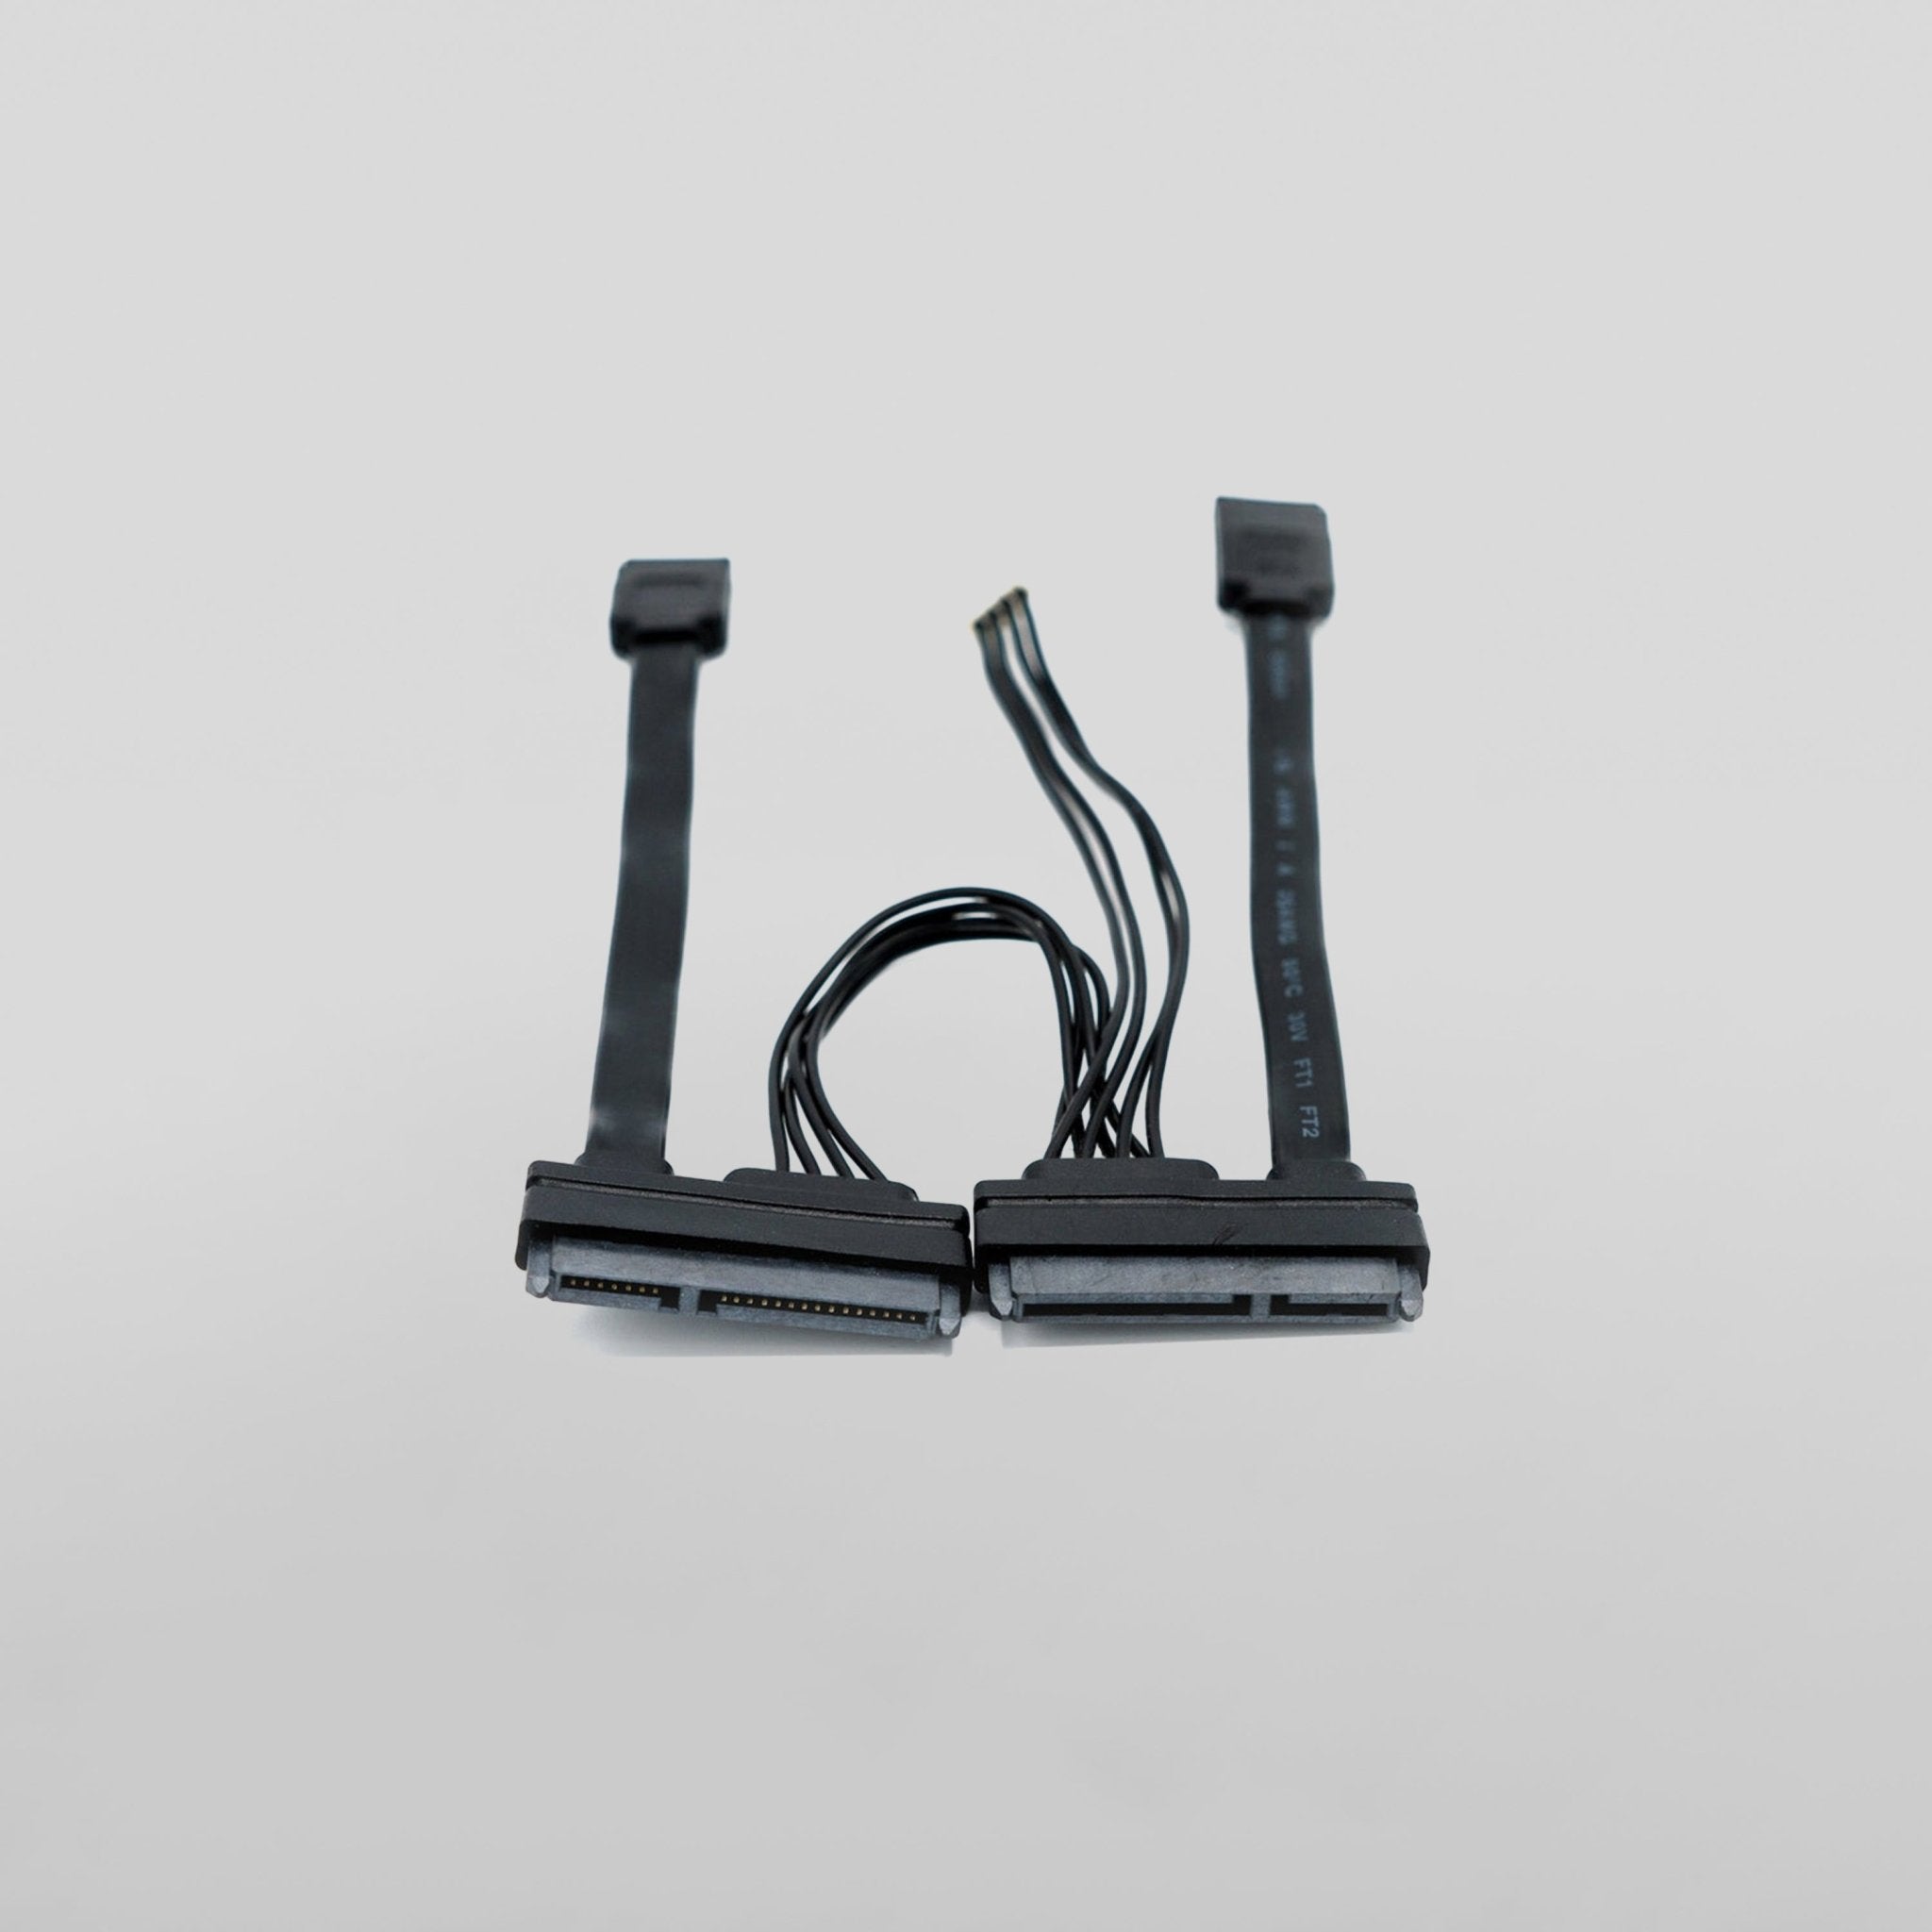 SATA Y-Cable for ZimaBoard - Zima Store Online